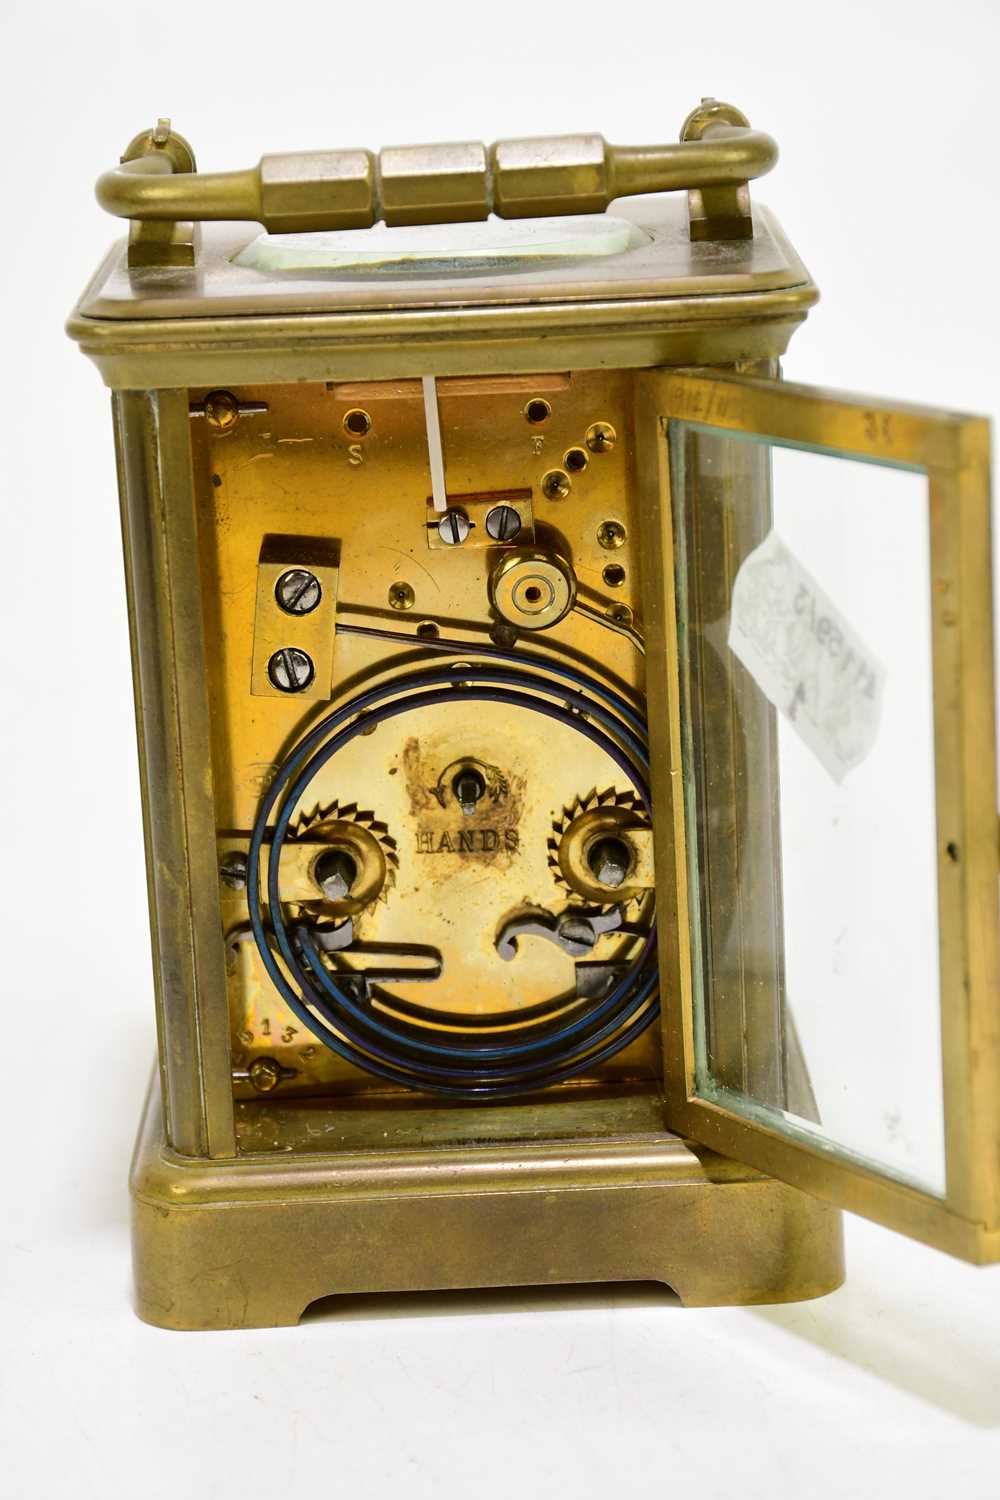 J.W. BENSON, LUDGATE HILL LONDON; a 19th century carriage clock with swing handle, the enamelled - Image 4 of 5